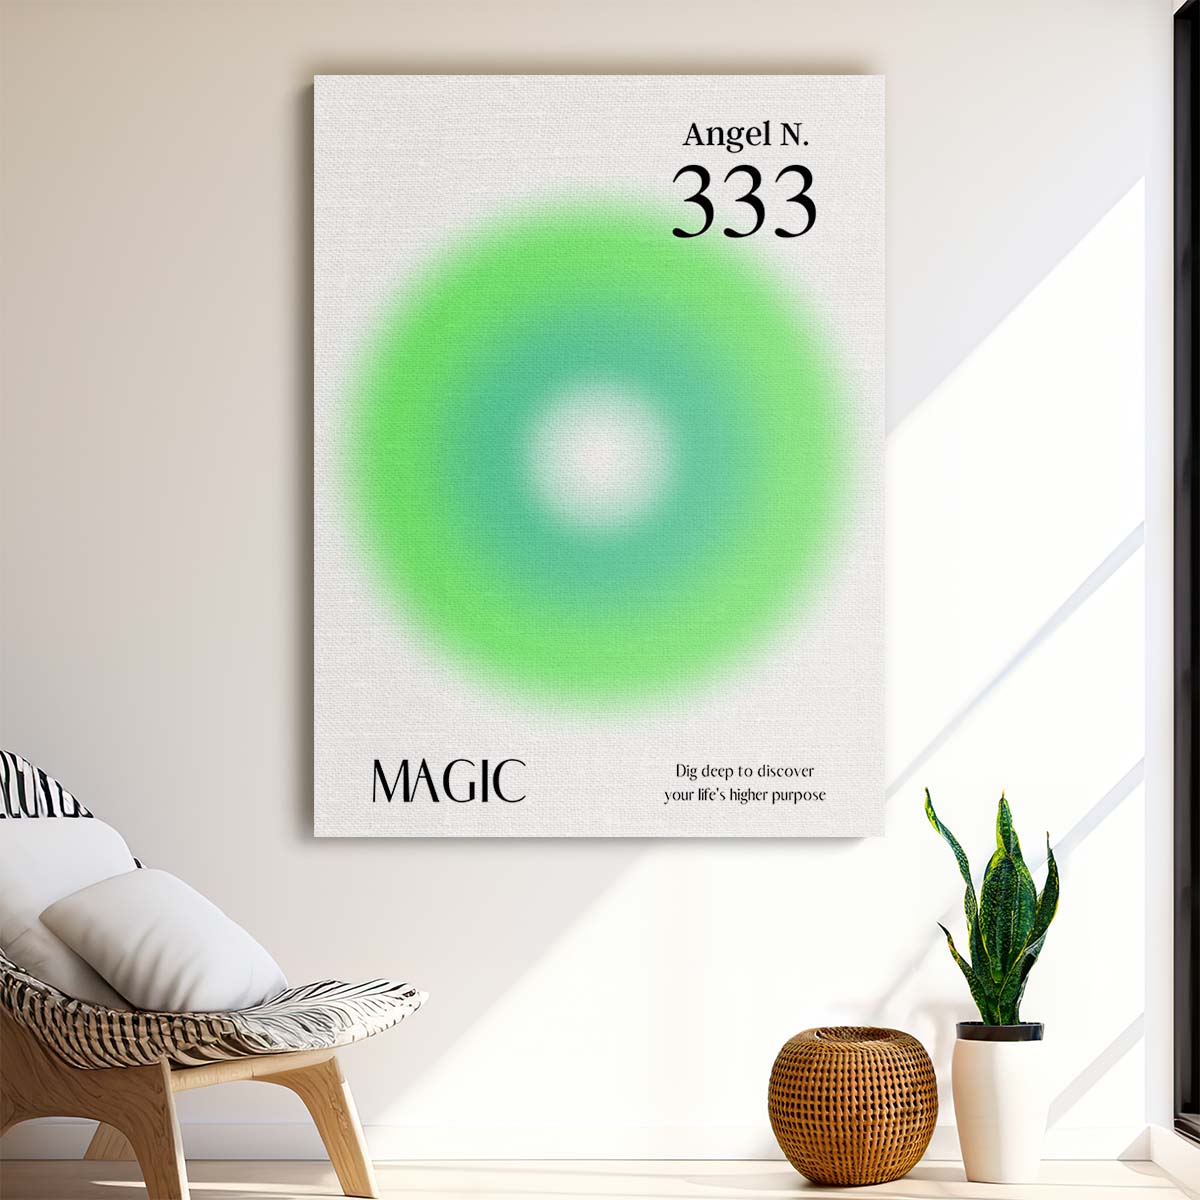 Colorful Angel Number 333 Illustration - Inspirational Manifestation Poster by Luxuriance Designs, made in USA